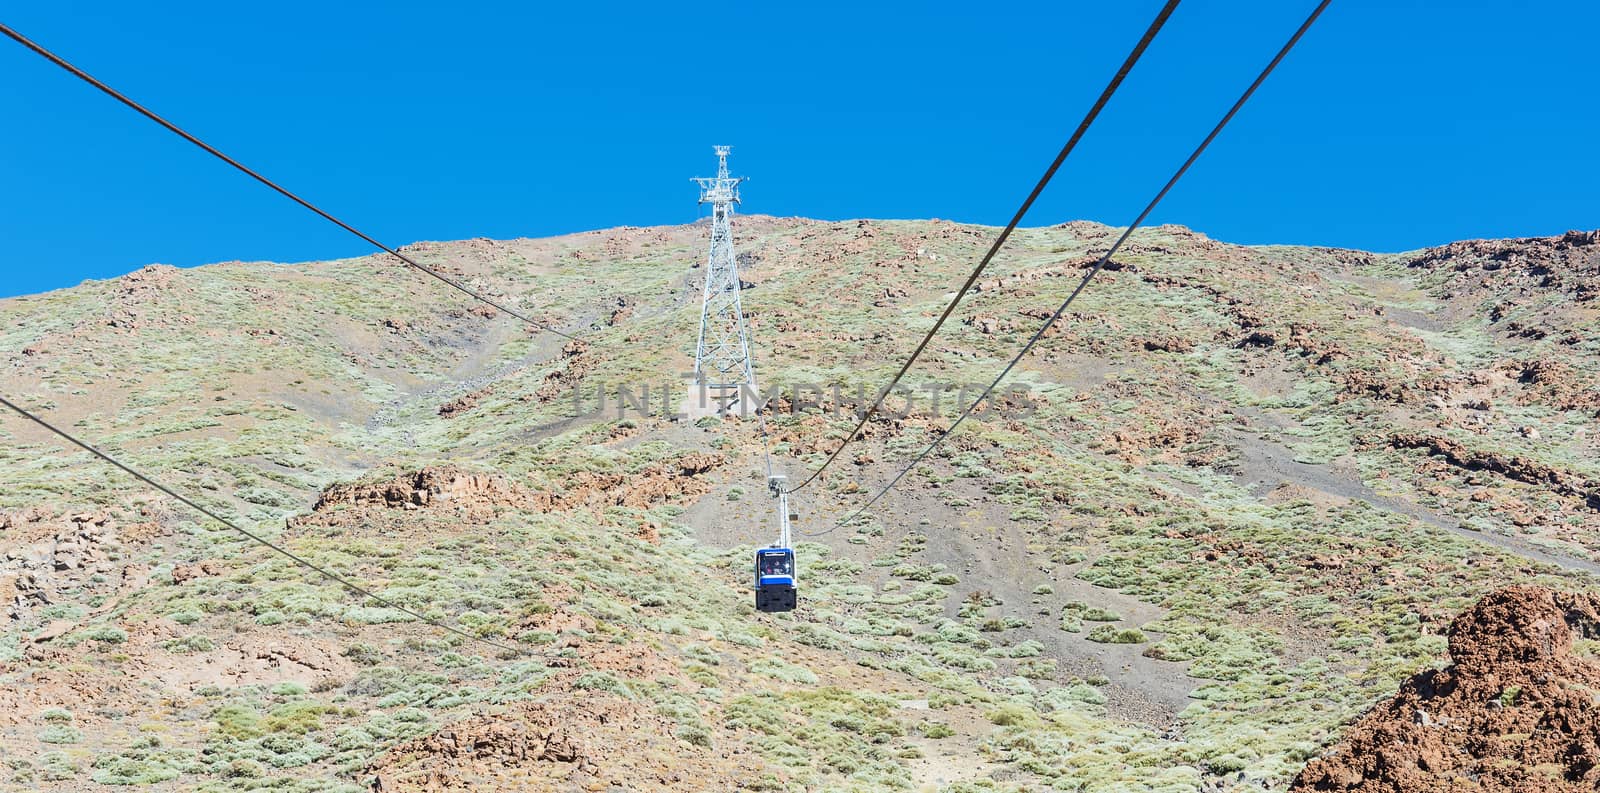 The cable car on the island of Tenerife for the ascent and descent of tourists on the volcano Teide.